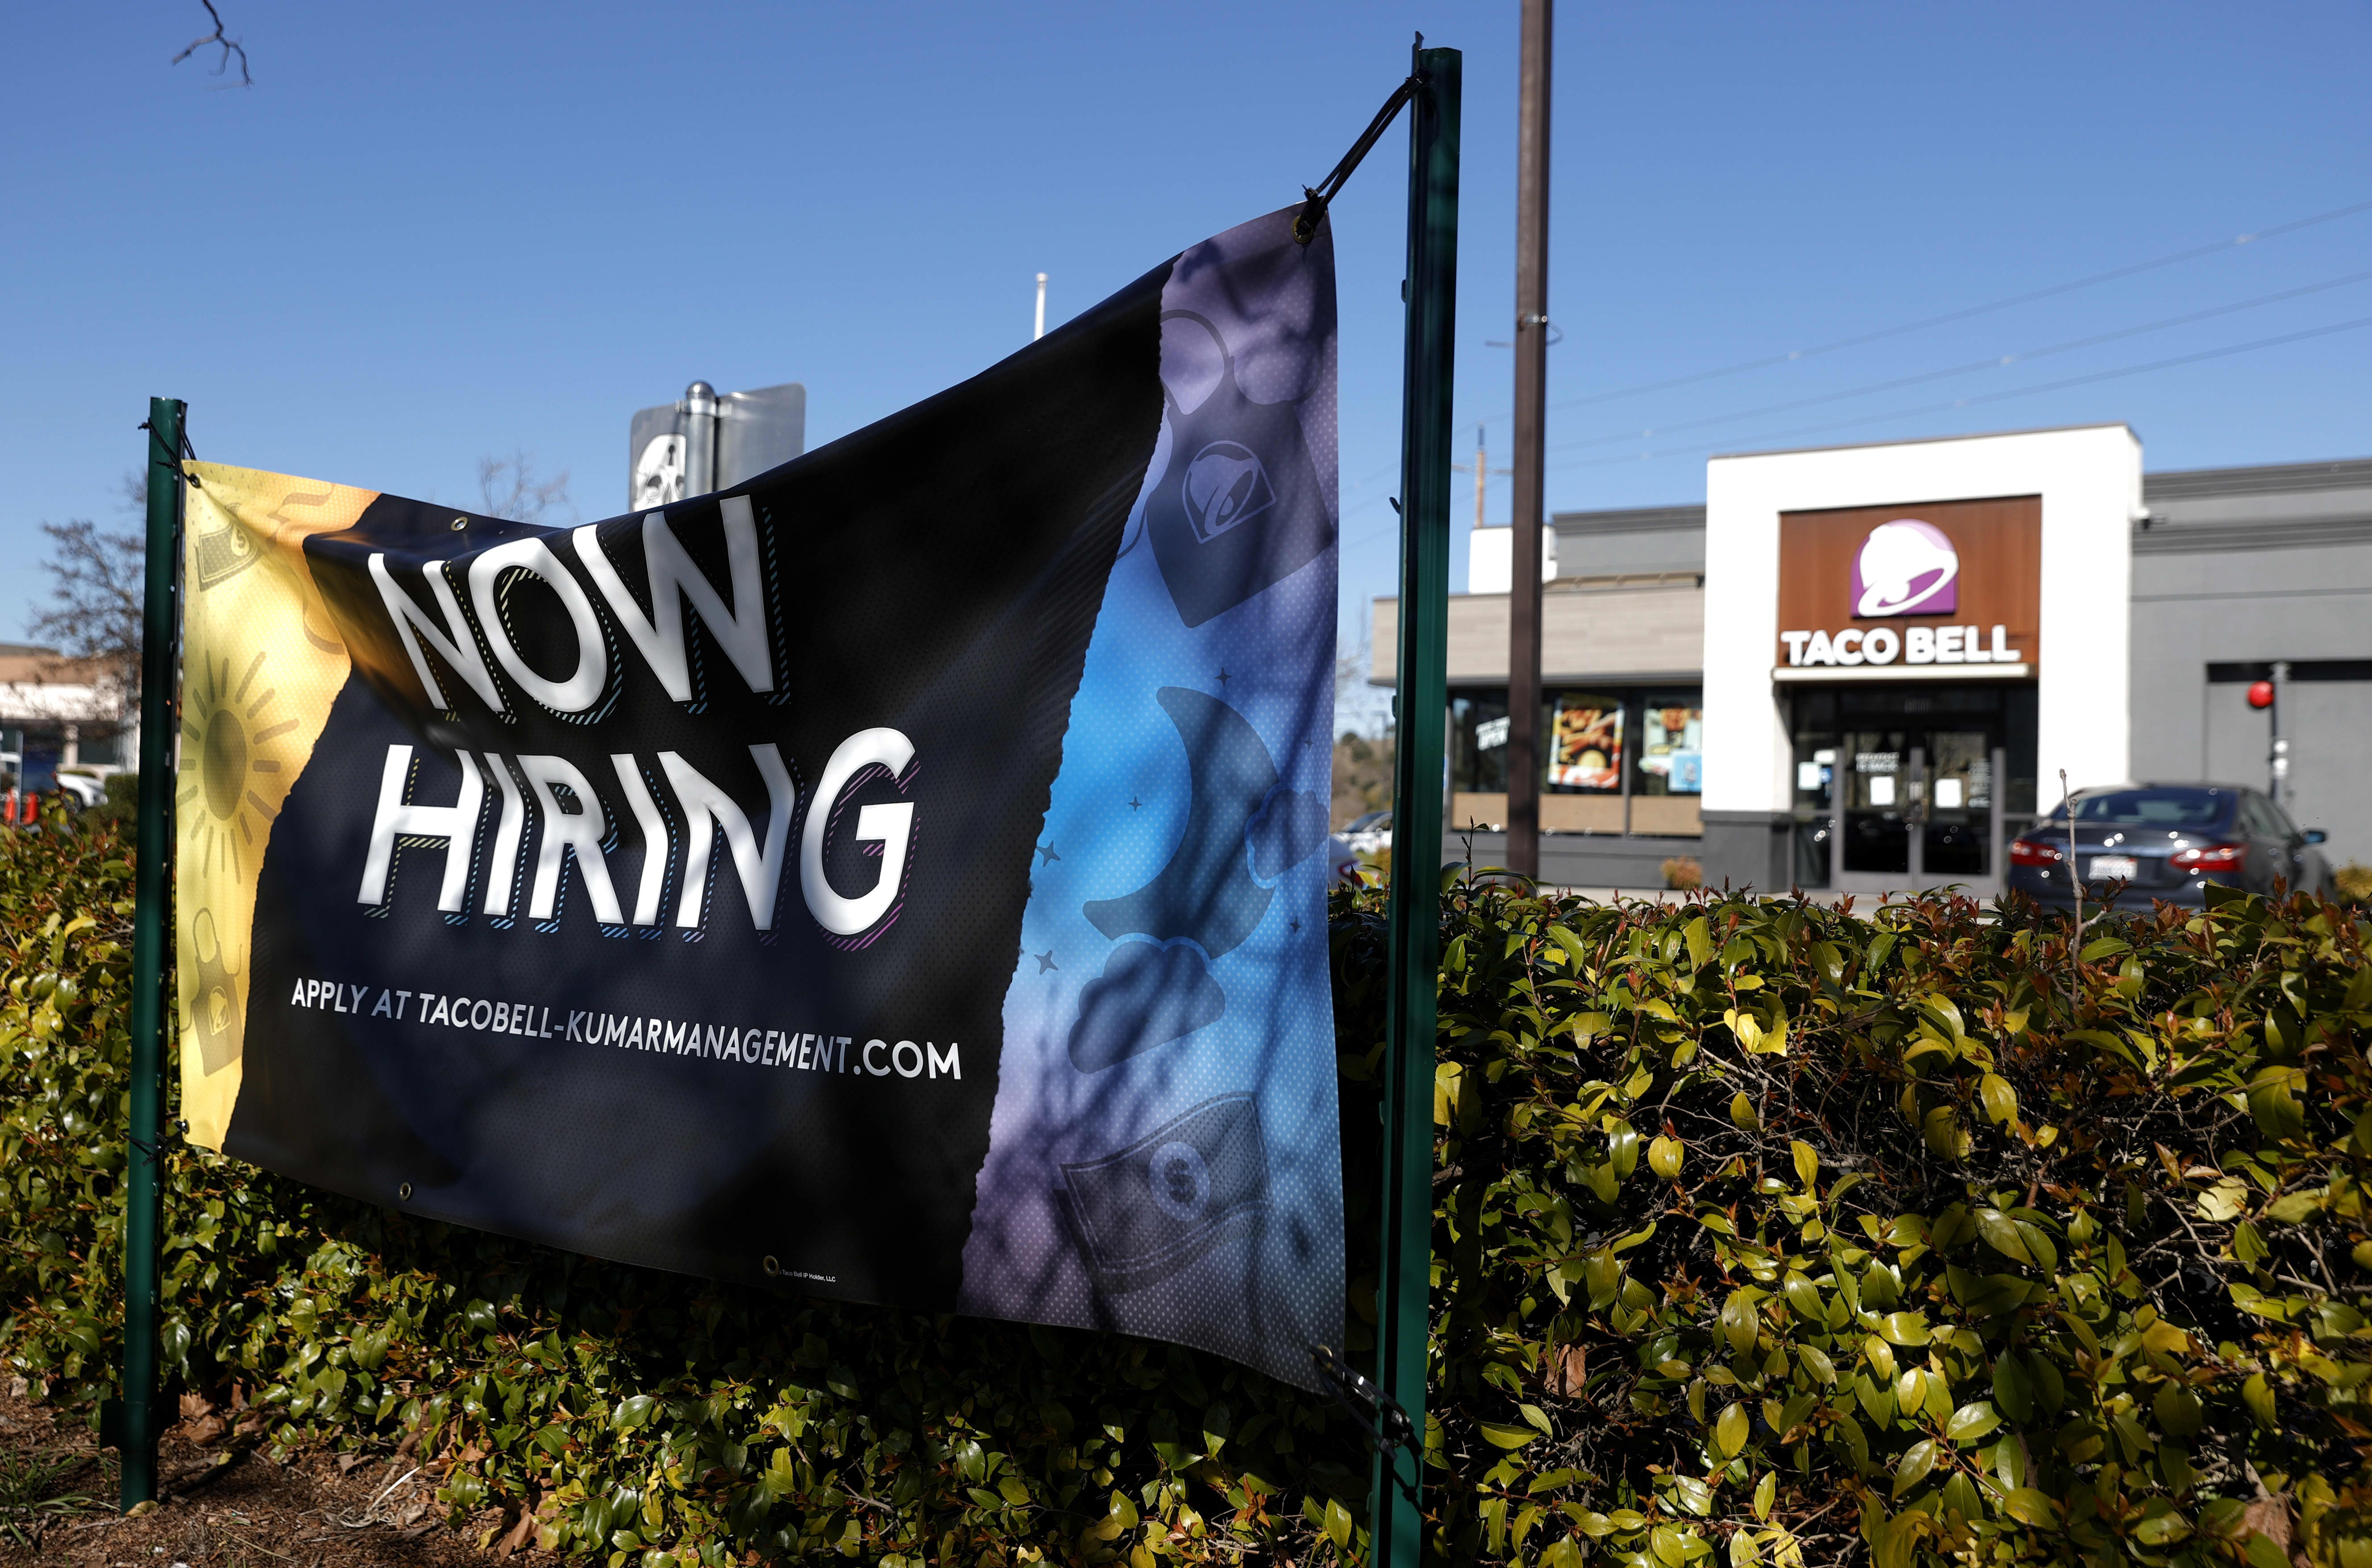 Restaurants see diners return, but feel a labor crunch as hiring becomes a top priority